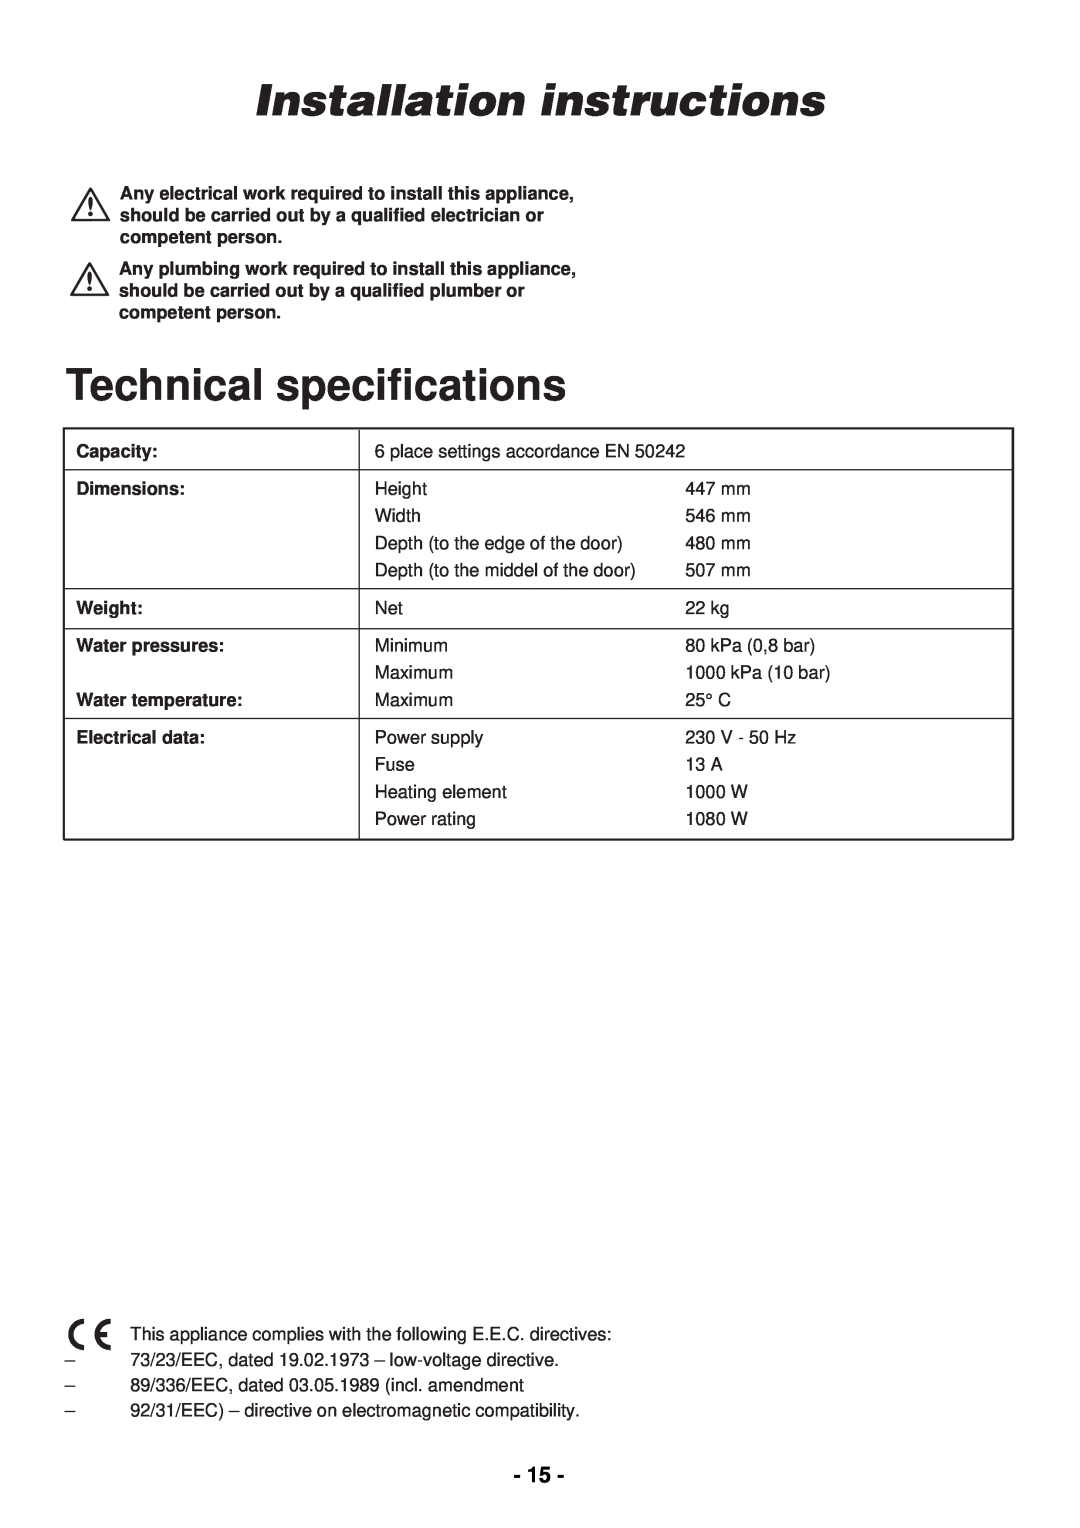 Zanussi ZDC 5465 manual Technical speciﬁcations, Installation instructions 